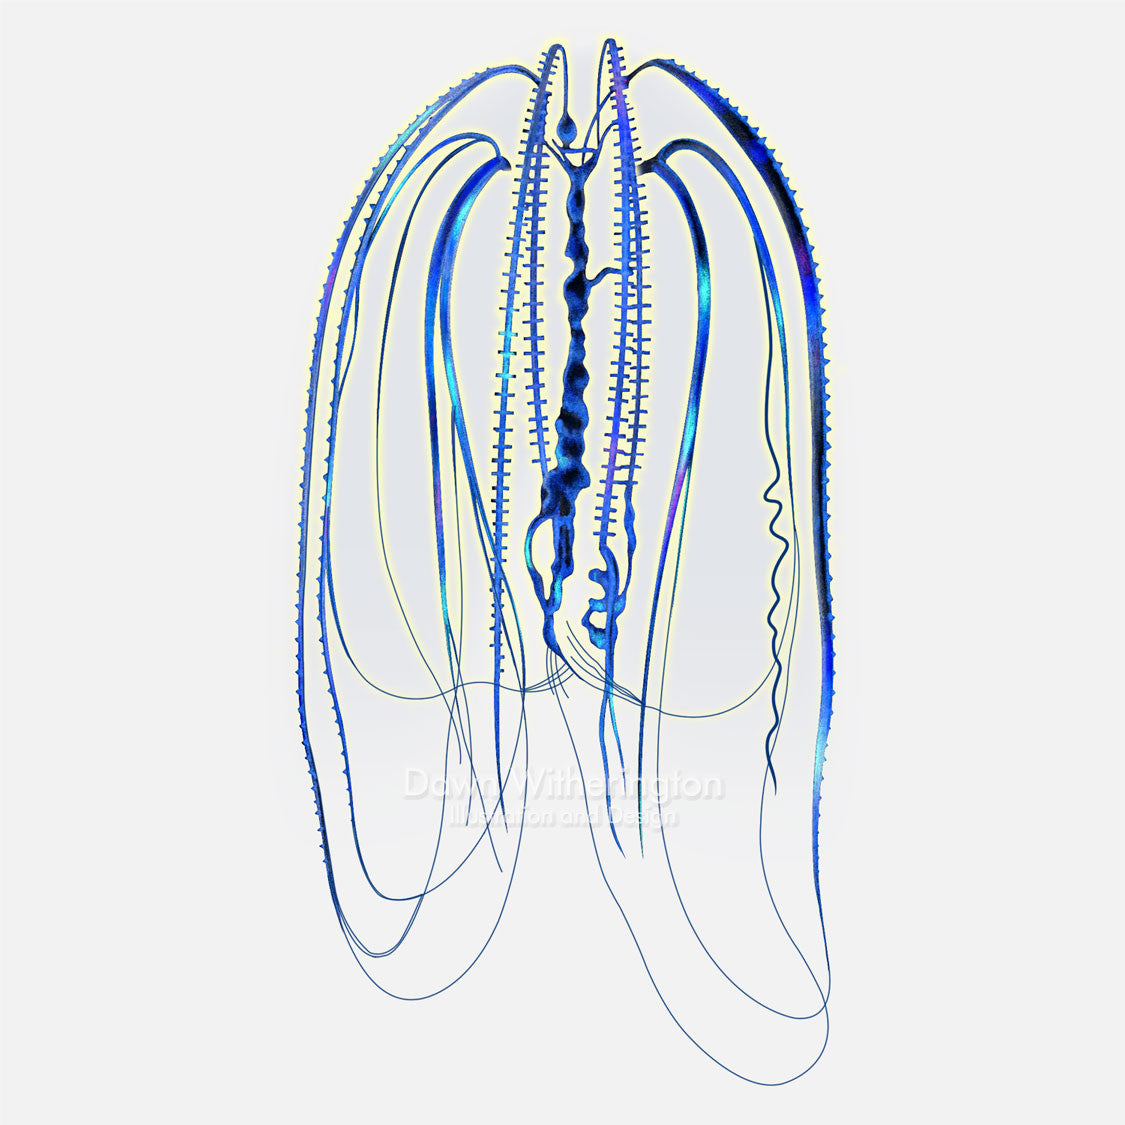 This Illustration of a comb jelly is accurate in detail.